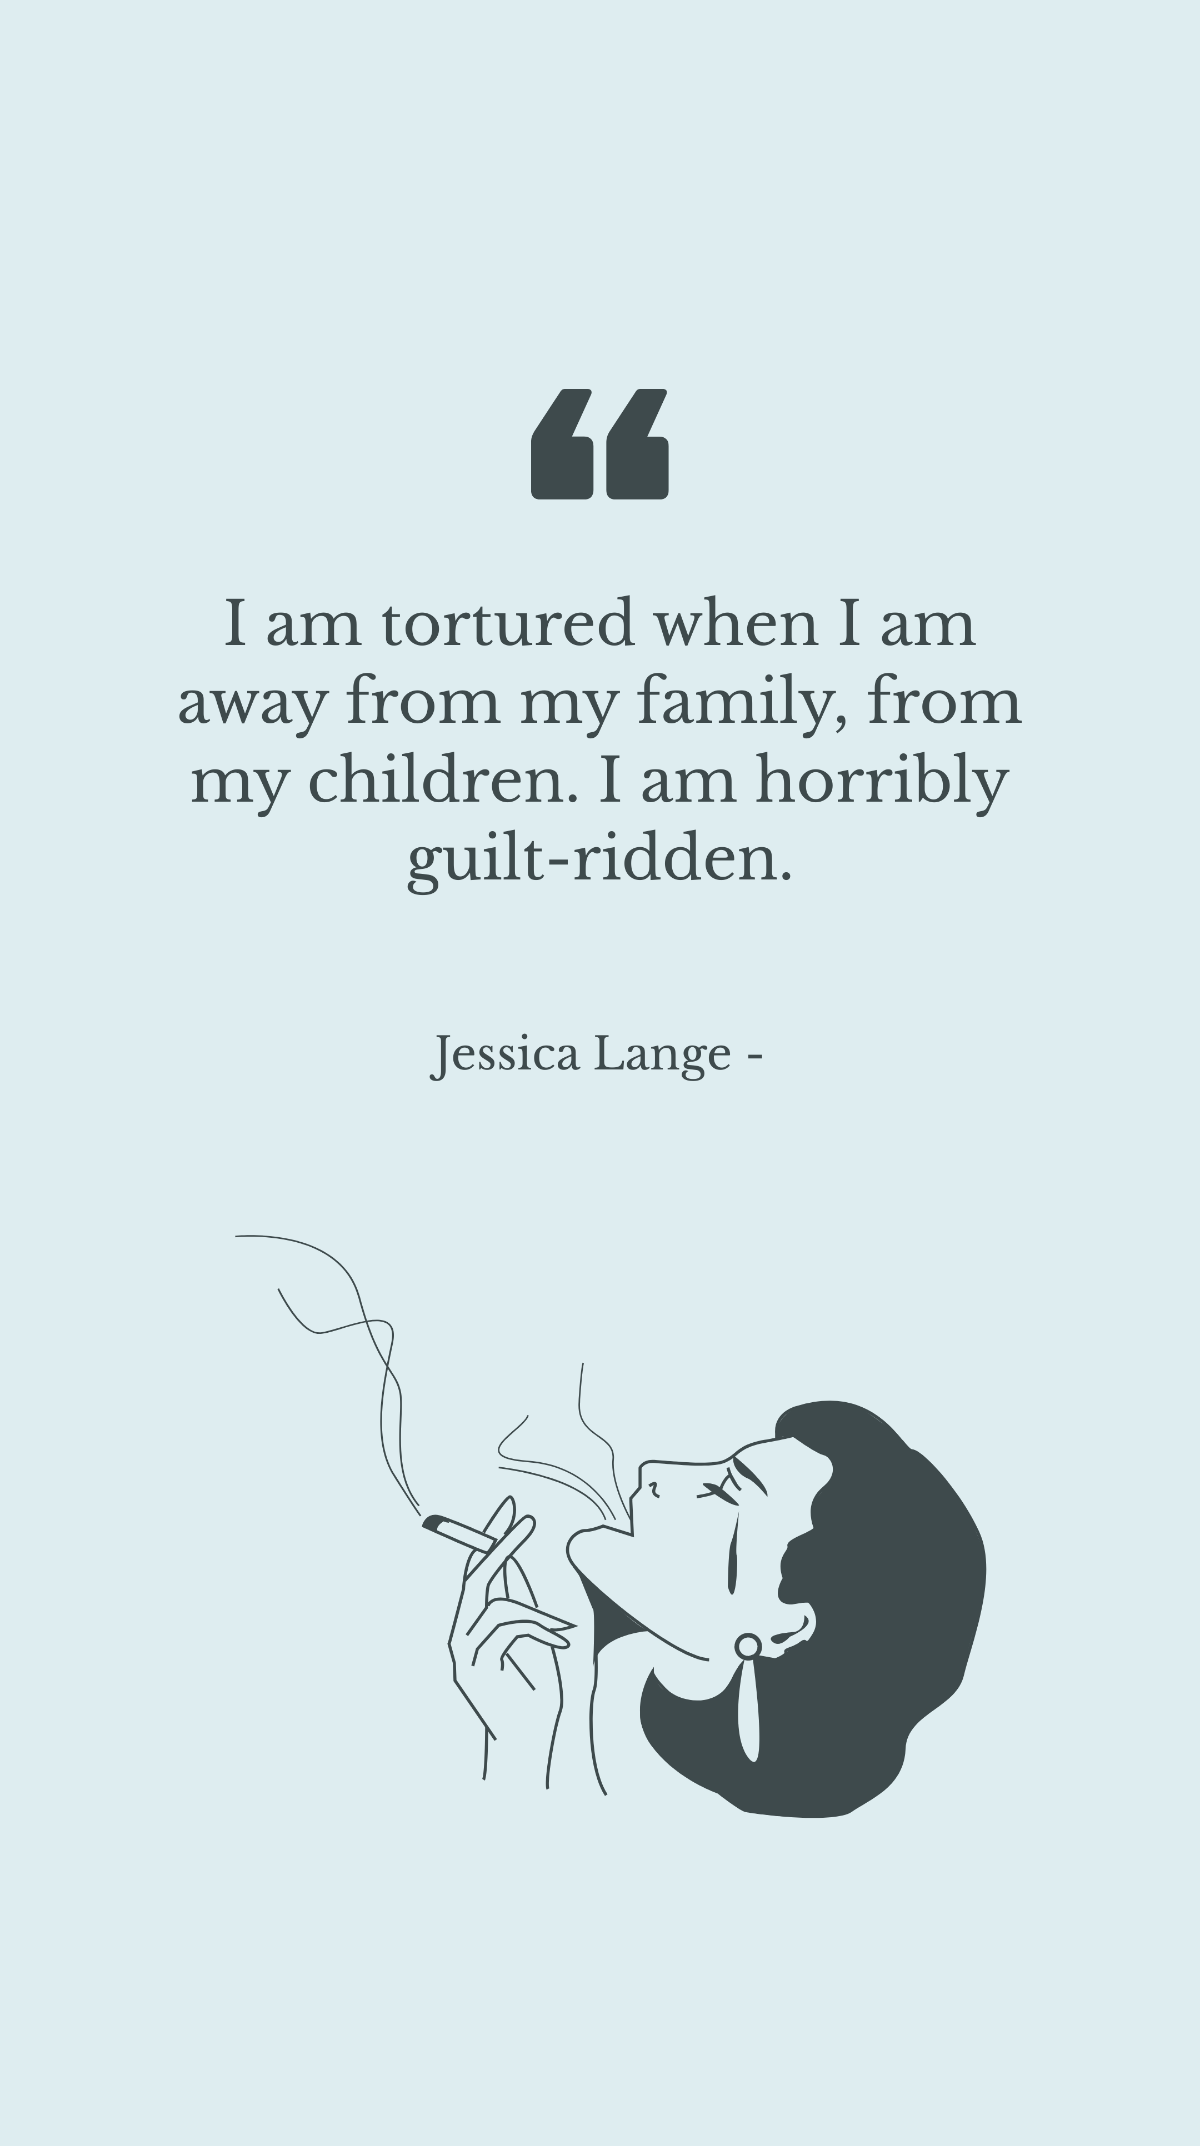 Free Jessica Lange - I am tortured when I am away from my family, from my children. I am horribly guilt-ridden. Template